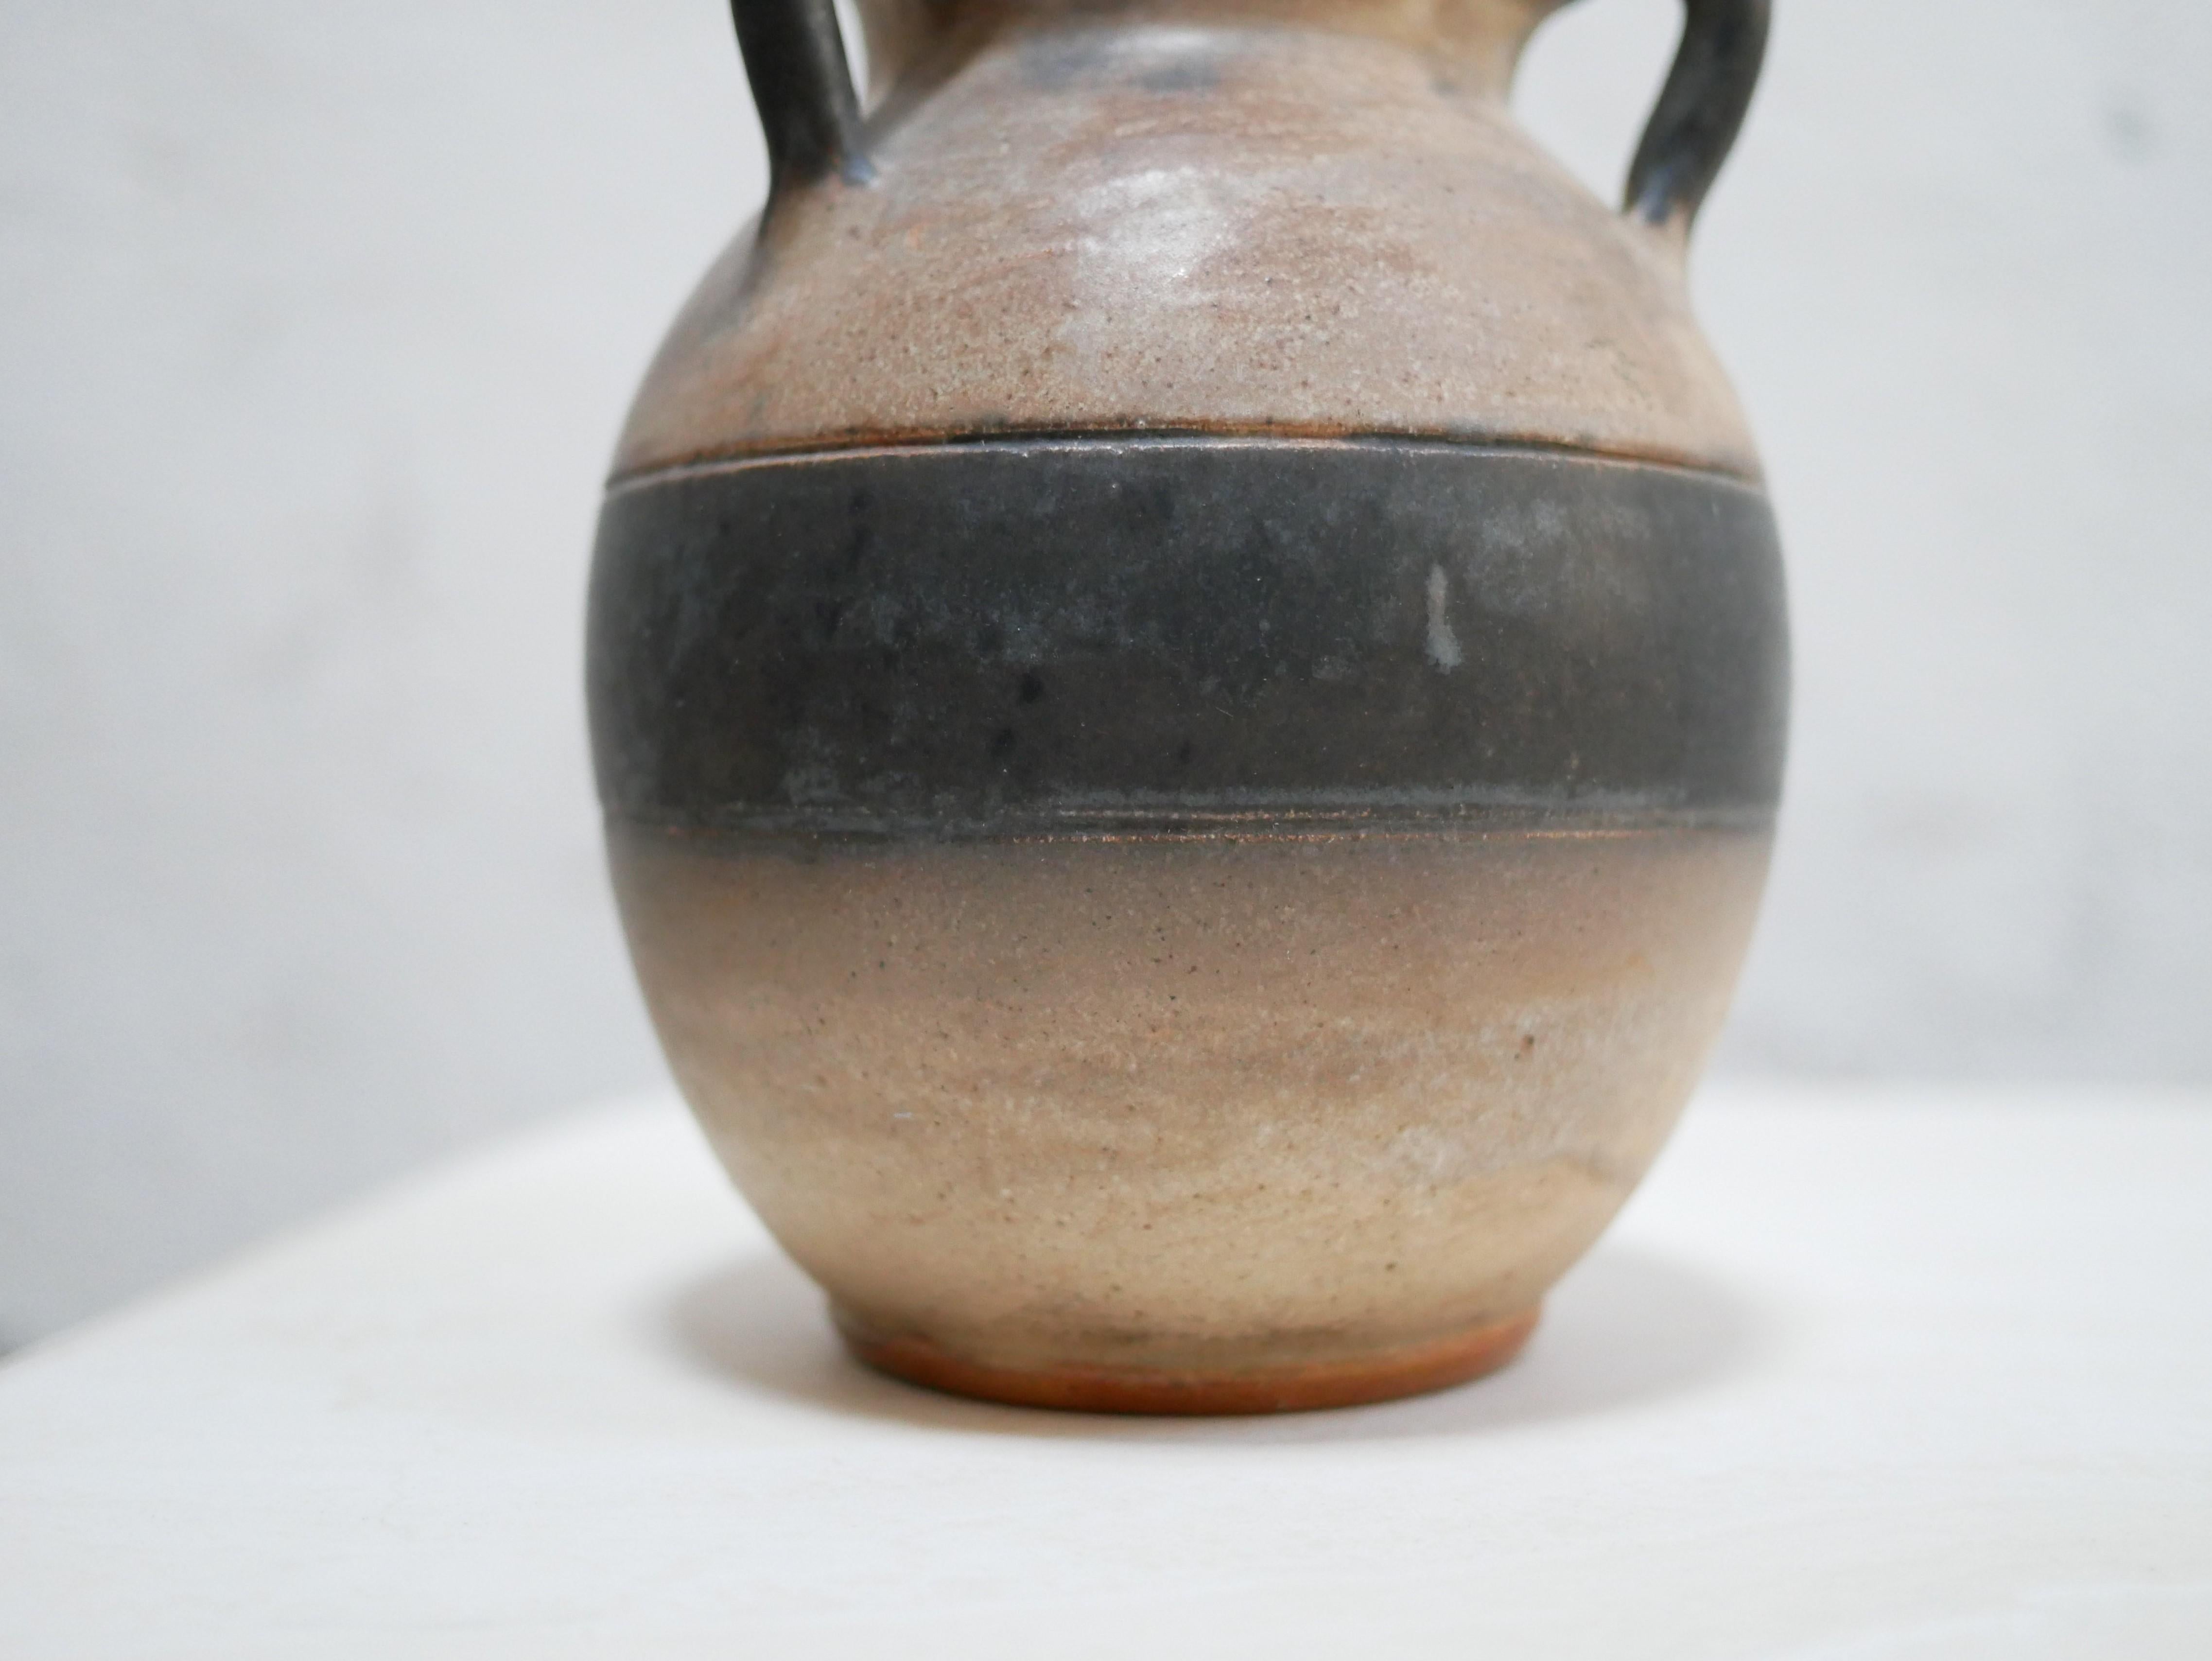 Stoneware vase designed by Willy Biron, Belgium, in the 1950s.

With its modern shape and its raw mineral color, this ceramic will be perfect in a natural, refined and delicate decoration.
We simply imagine it placed on a shelf or a piece of